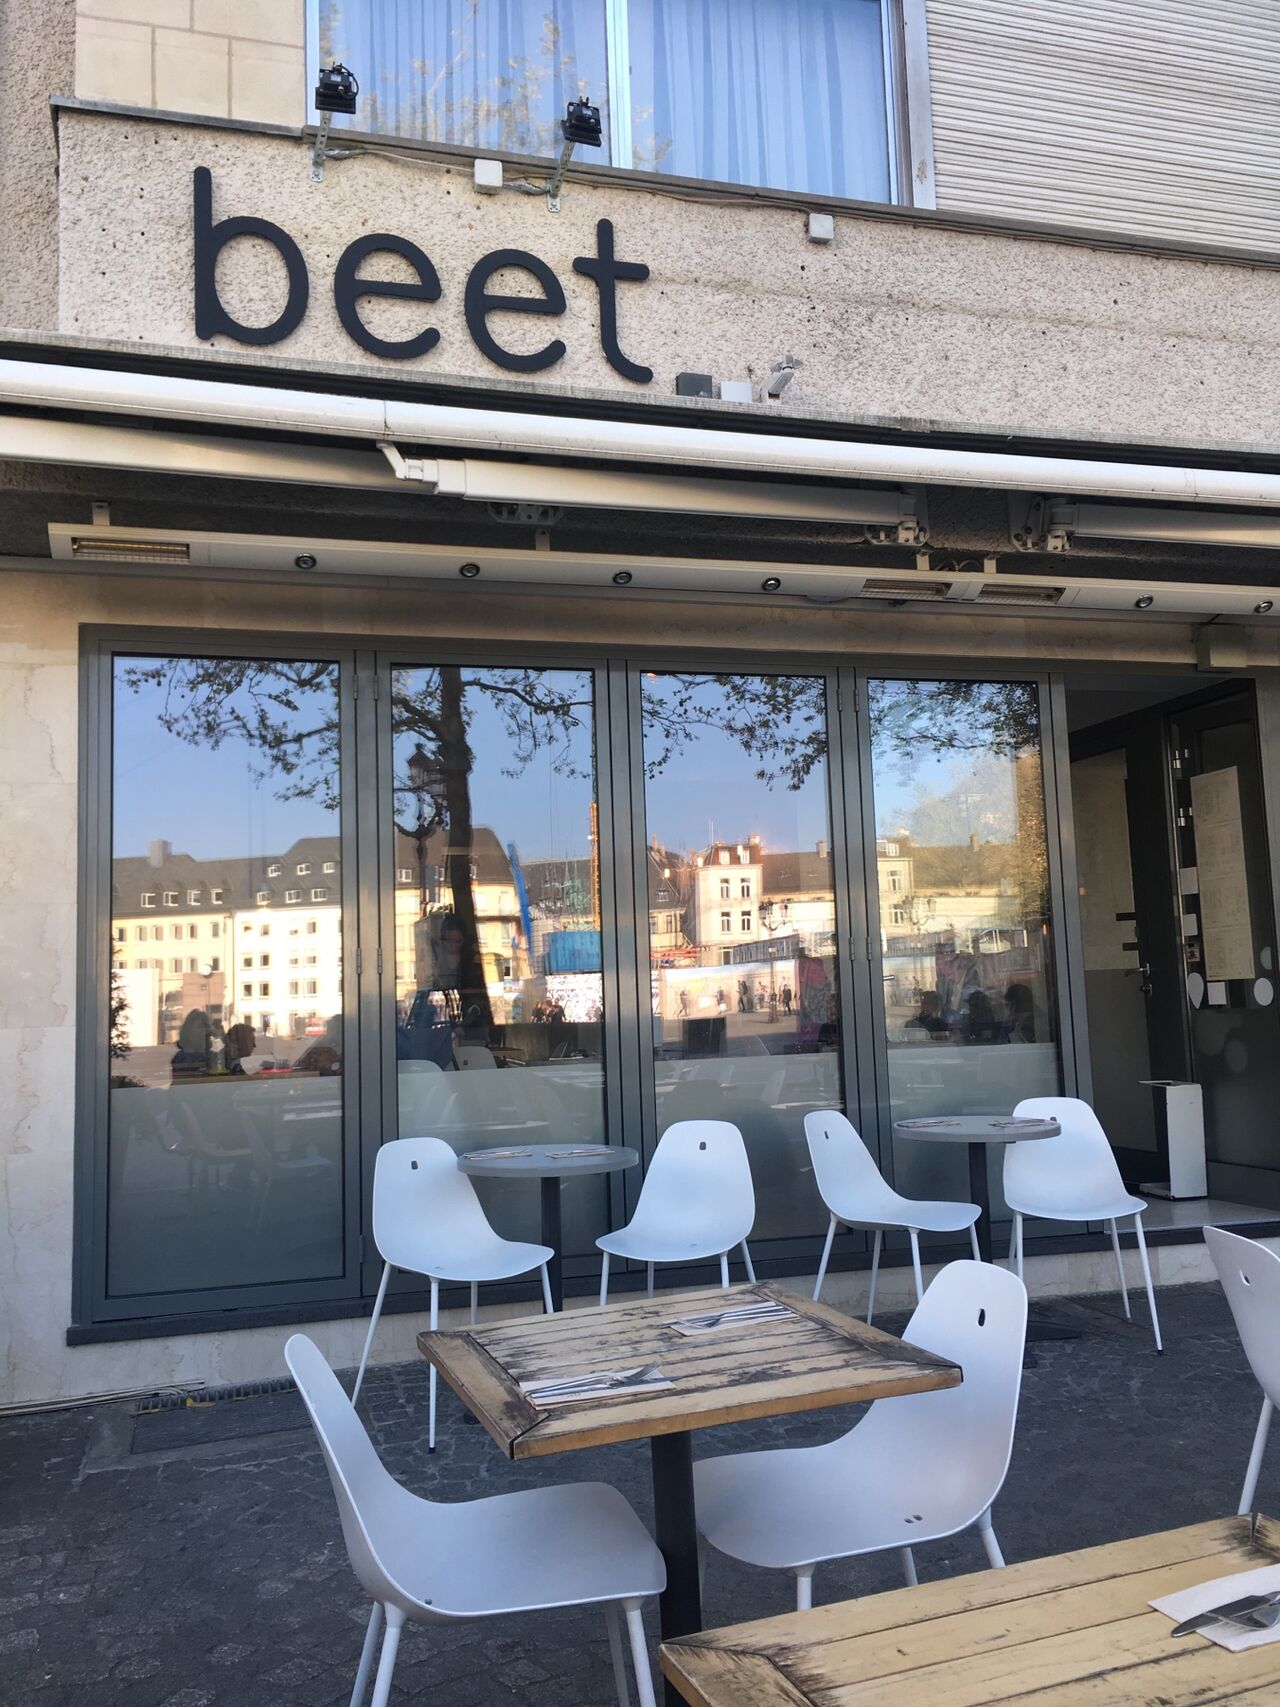 A photo of beet